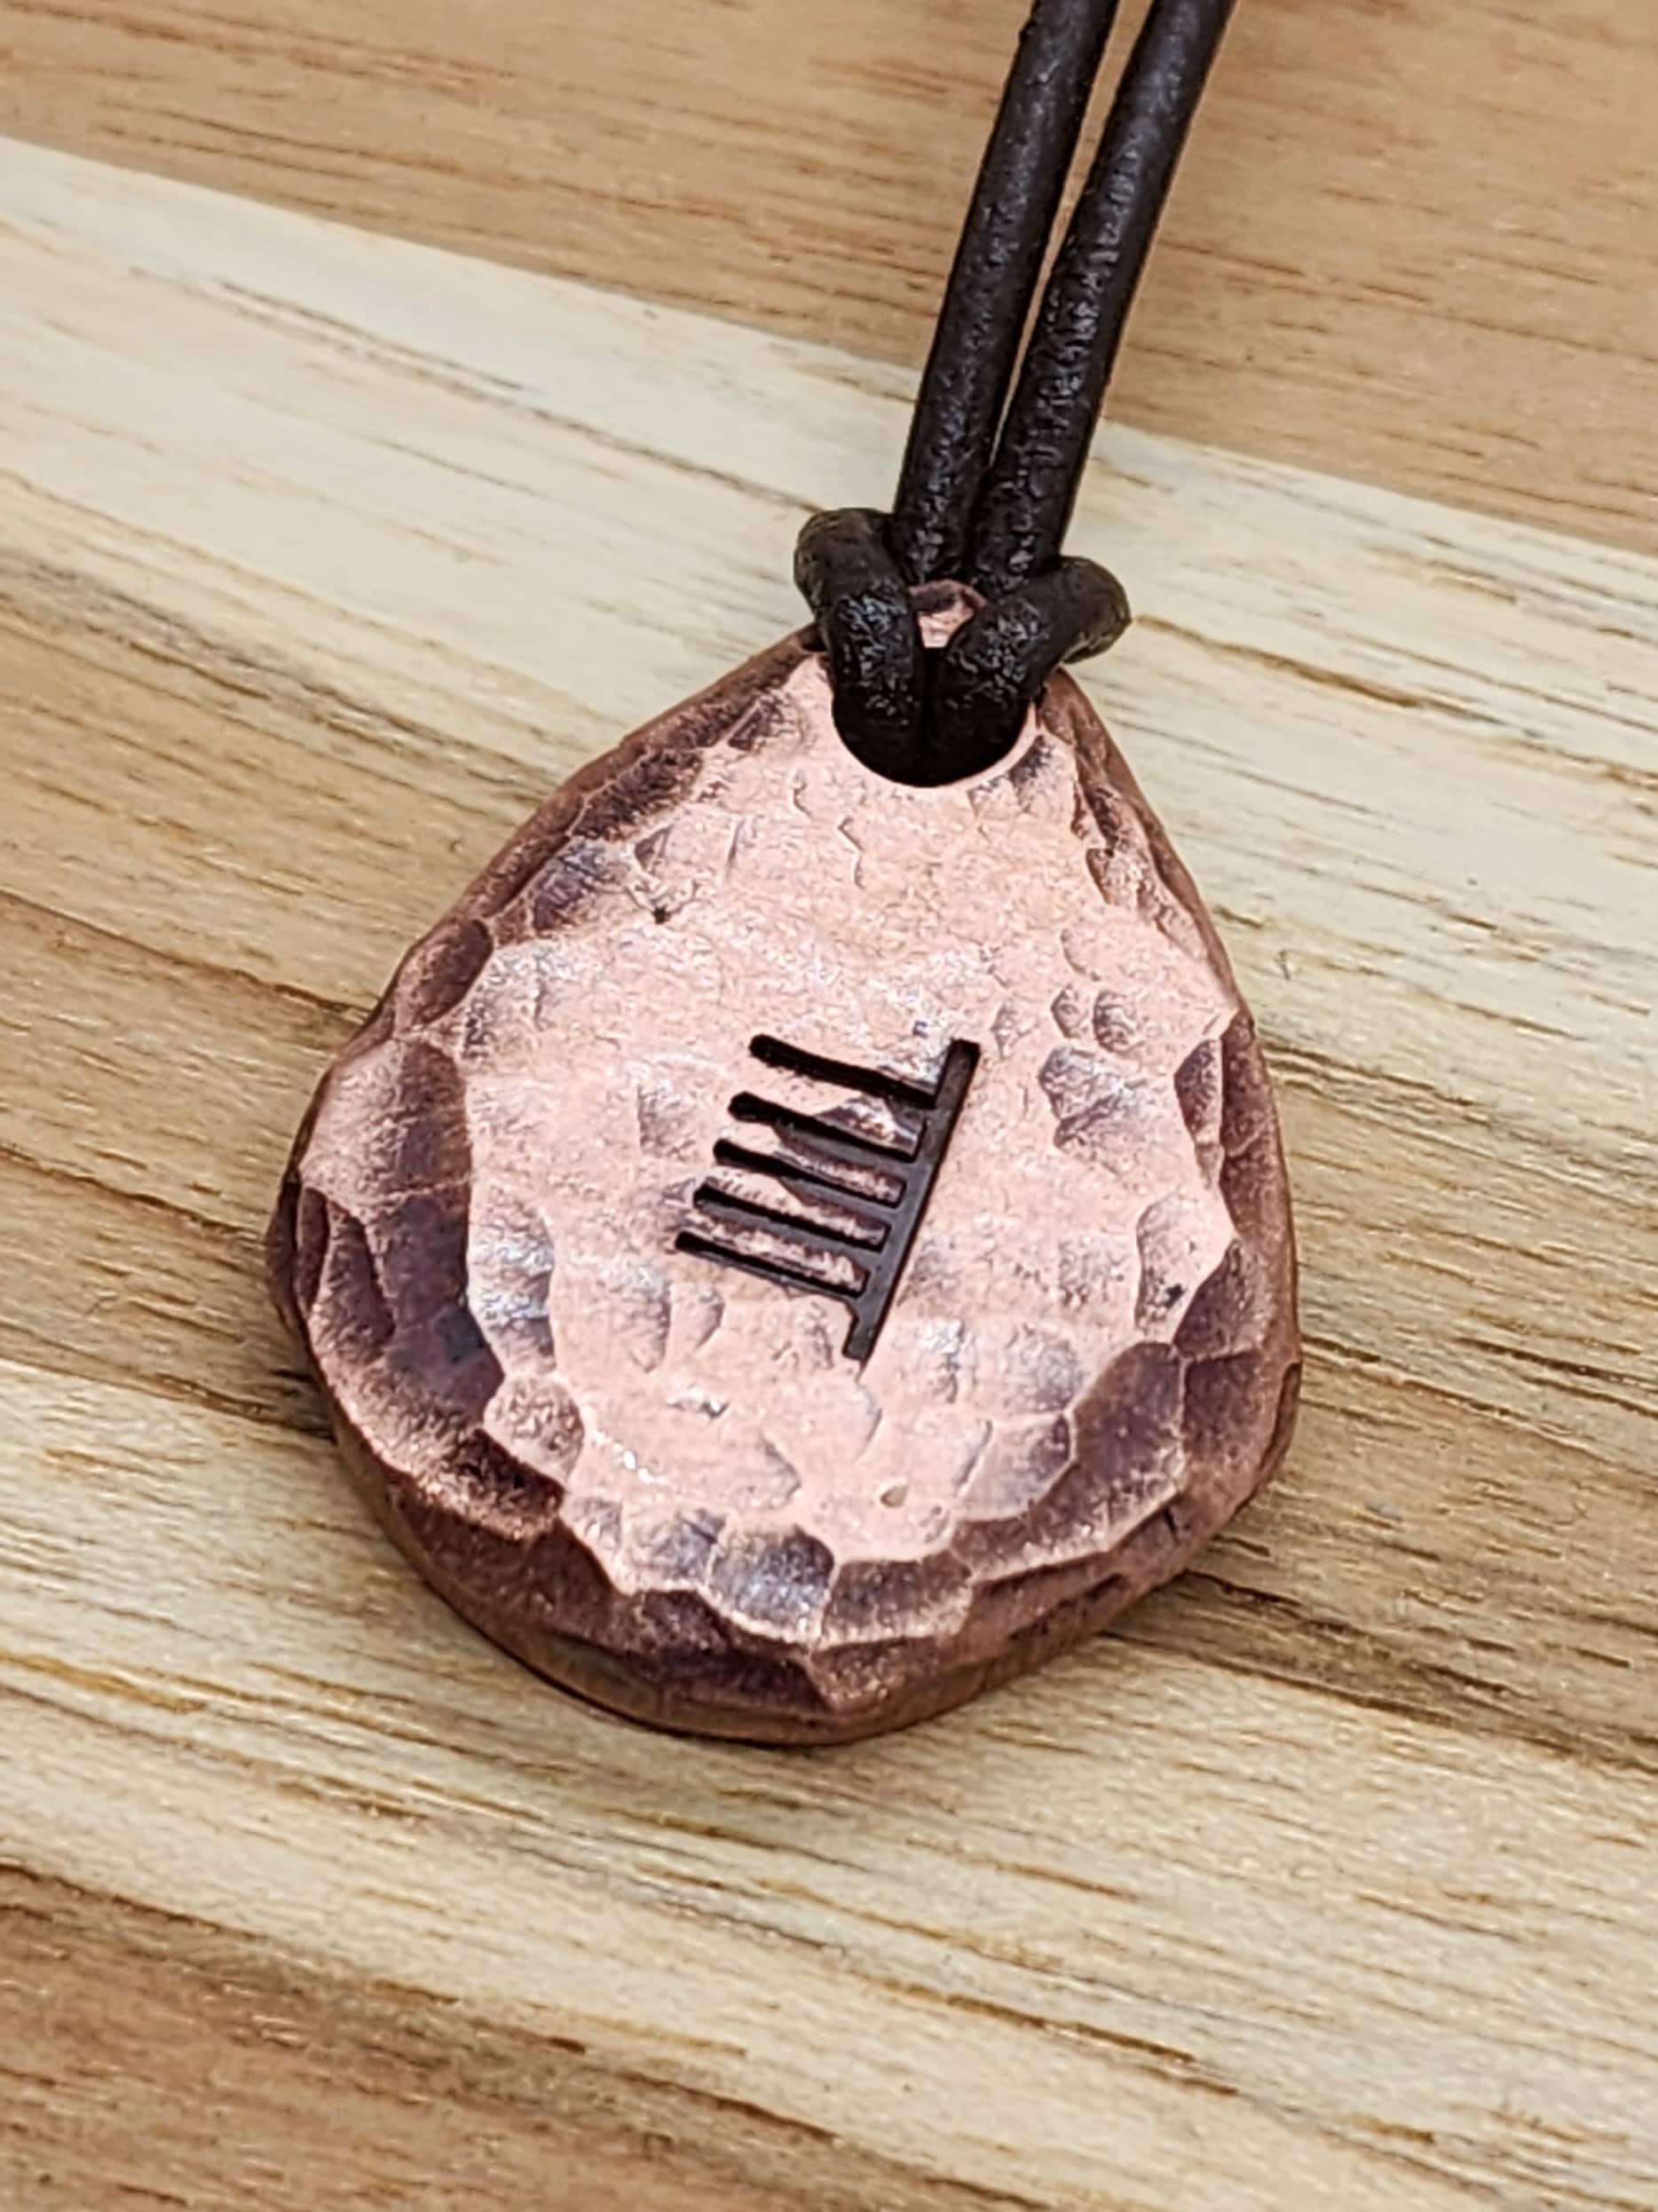 Hammered Copper Pendant and Necklace in Wood Grain Styling with Sheen